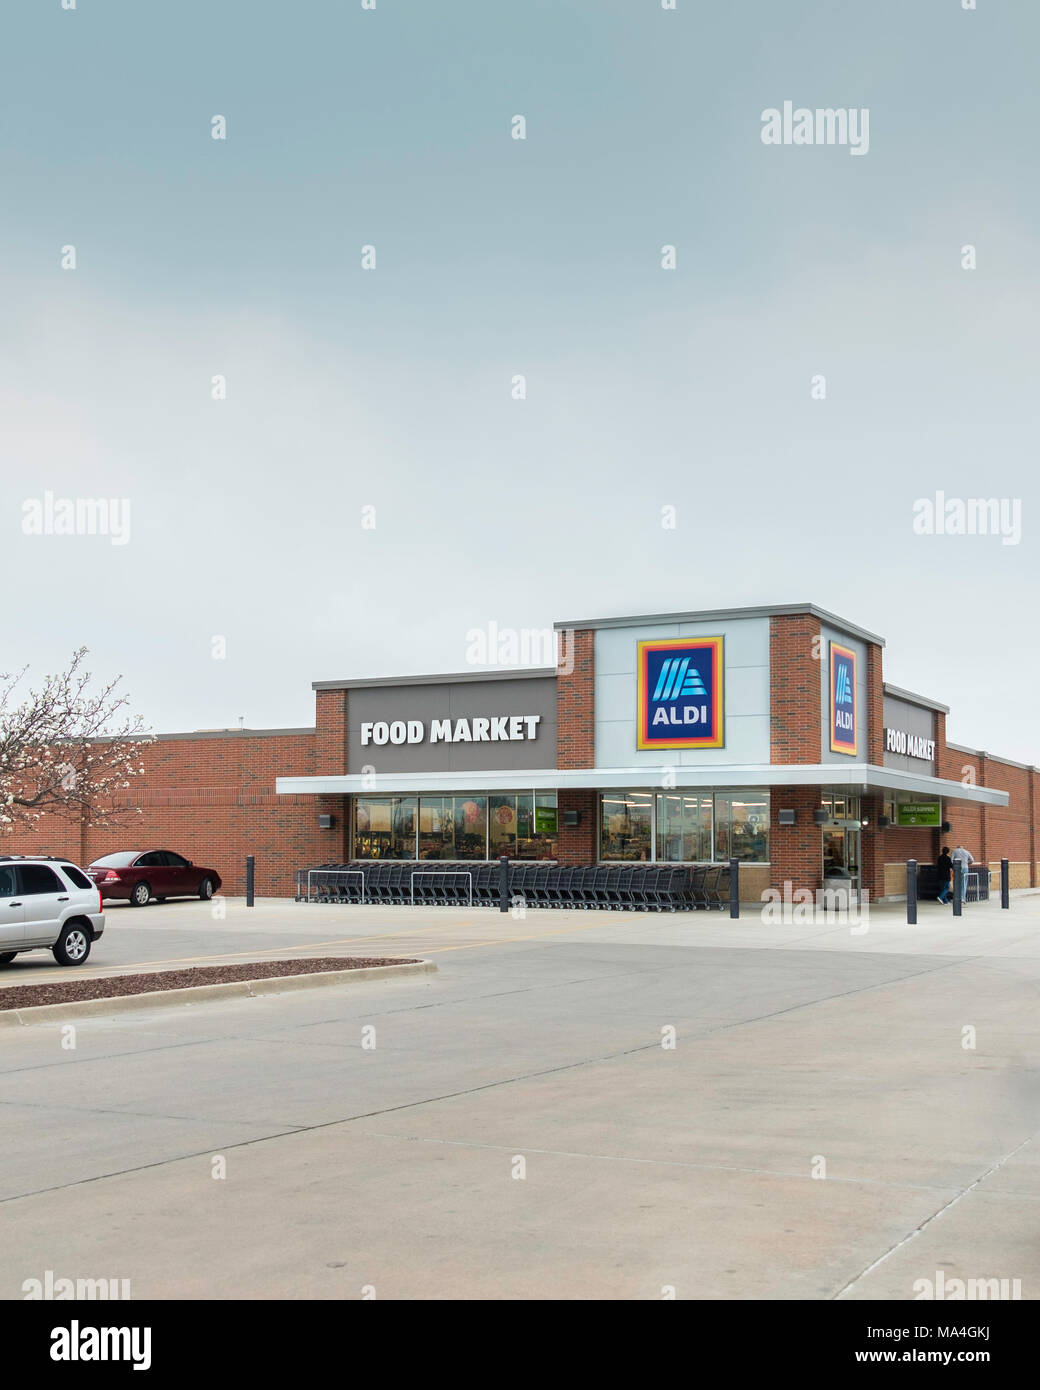 Exterior of an Aldi food store or supermarket, selling at discounted prices in Wichita, Kansas, USA. Stock Photo